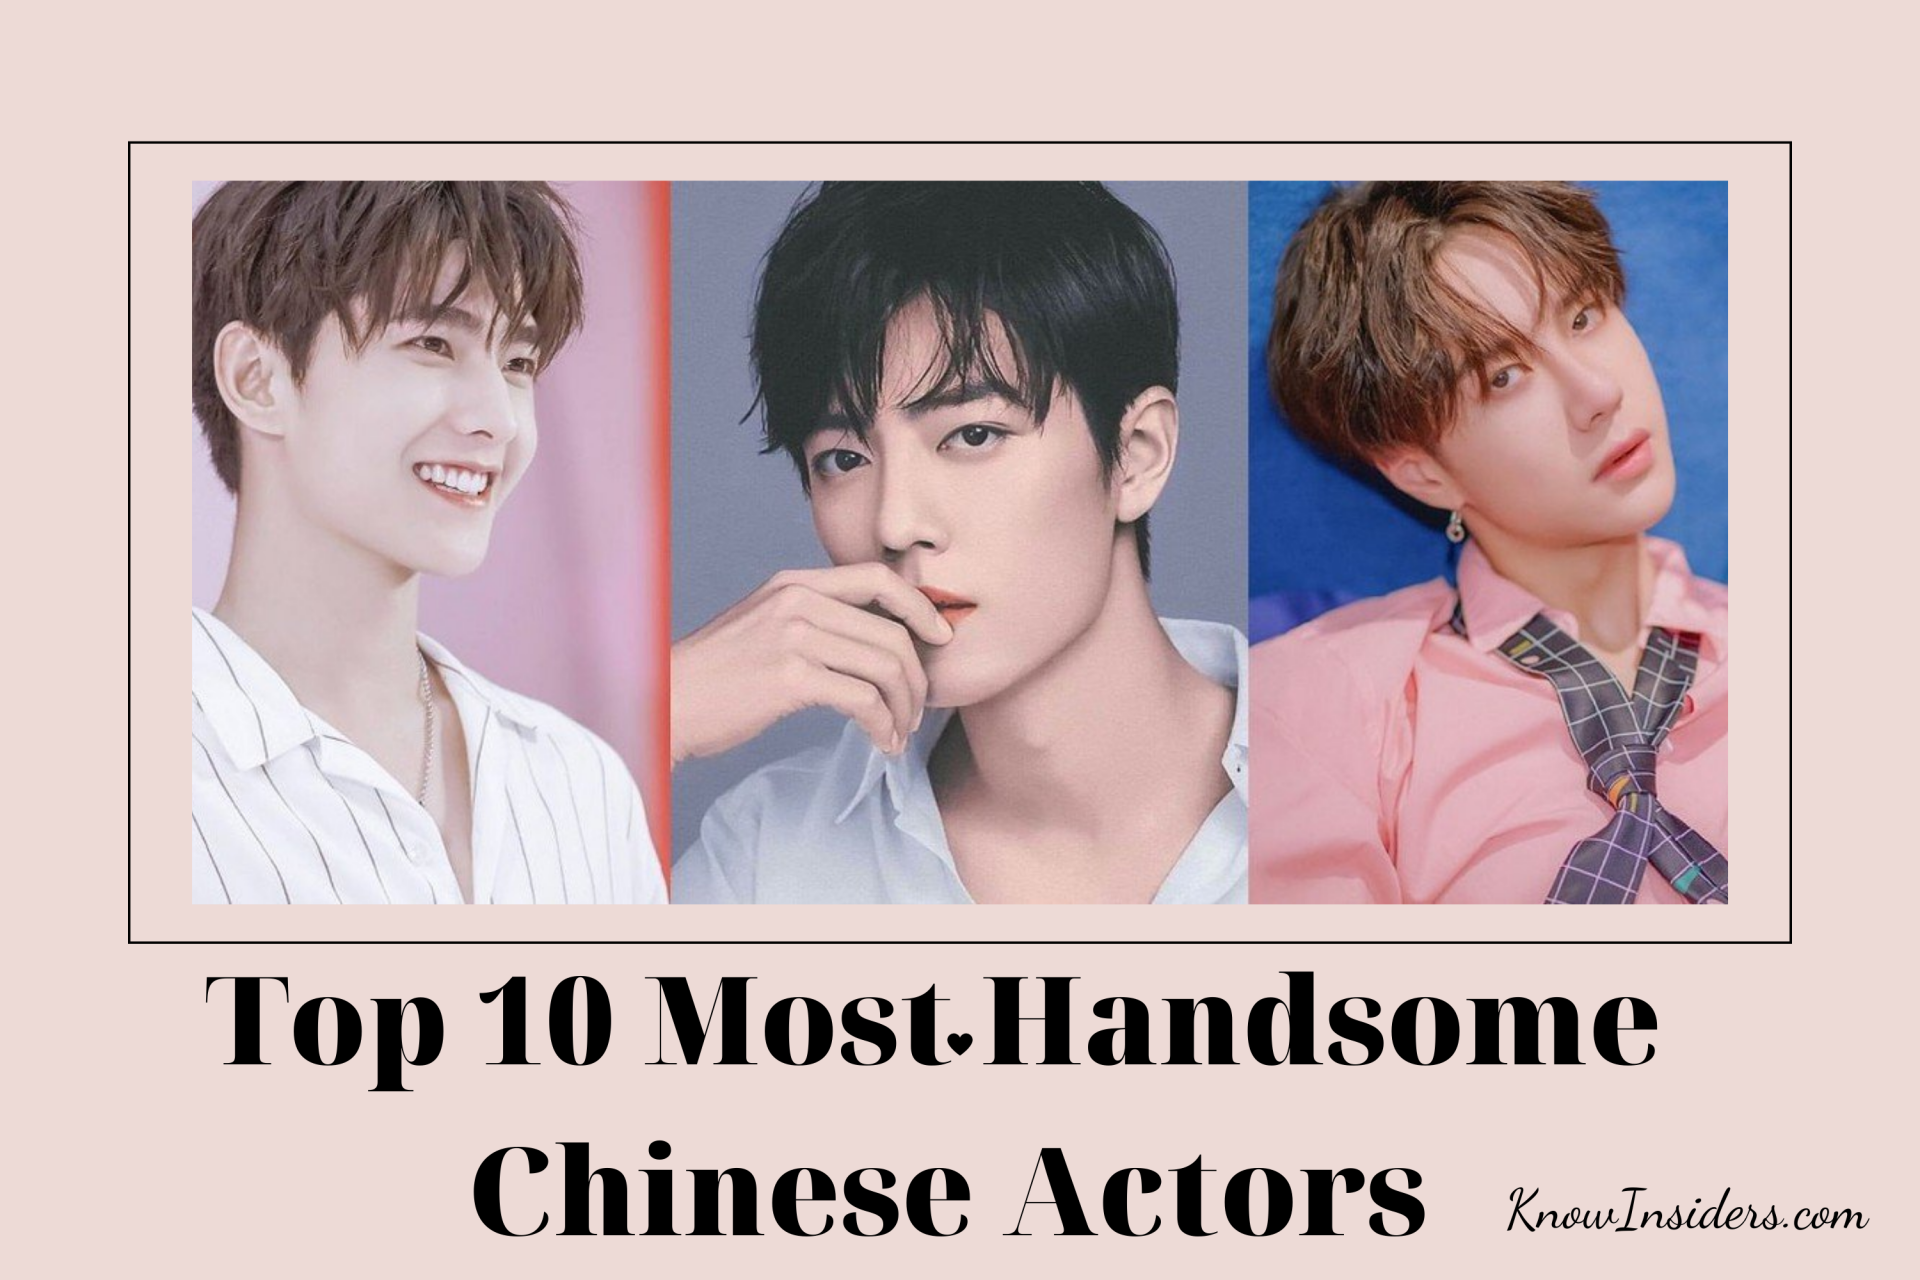 Top 10 Most Handsome Chinese Actors - Updated